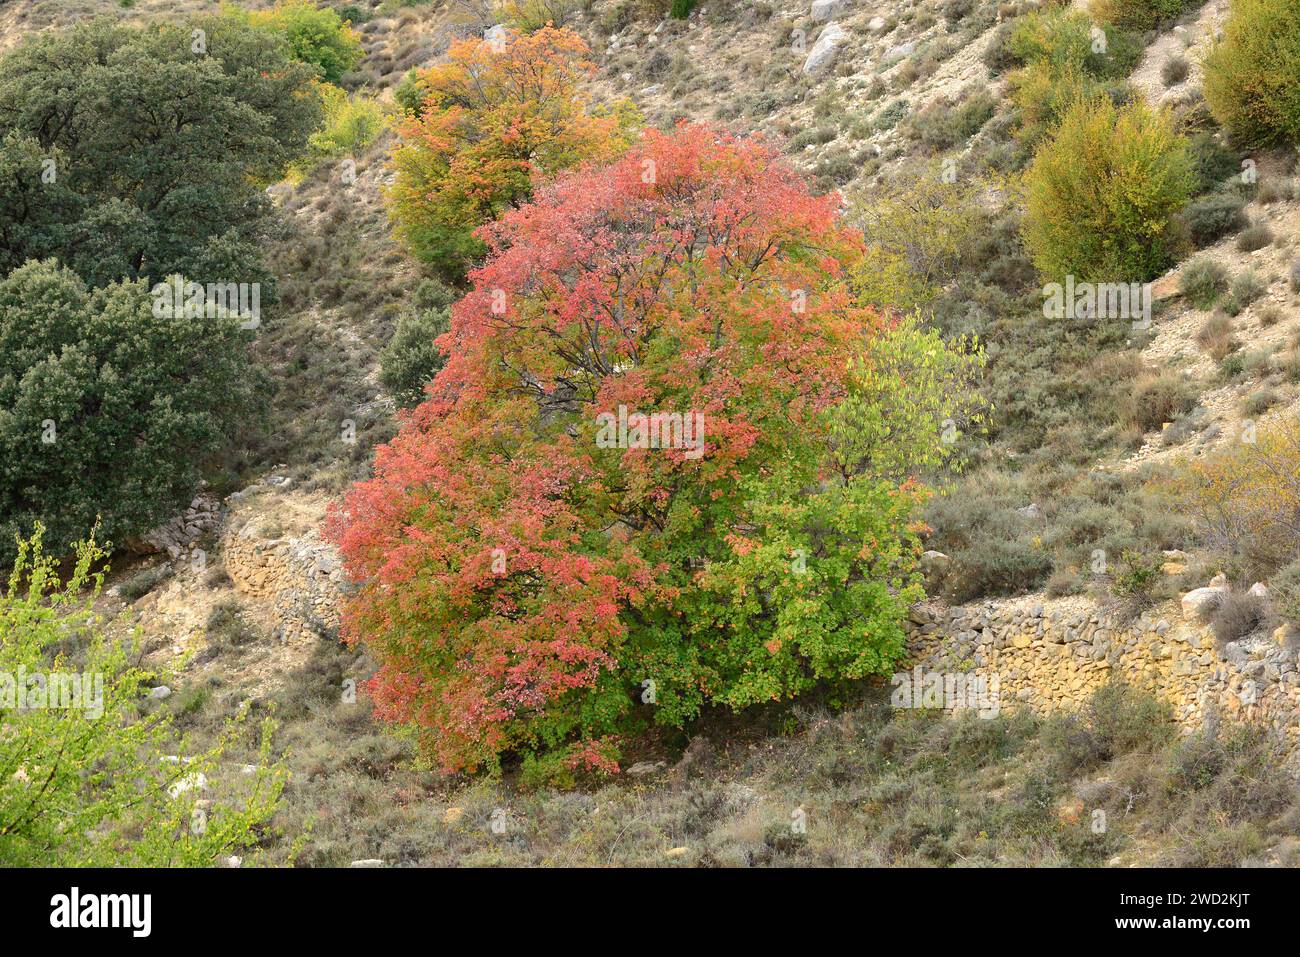 Italian maple (Acer opalus) is a deciduous tree native to southwestern Europe and northwest Africa. This photo was taken in Pitarque, Teruel province, Stock Photo